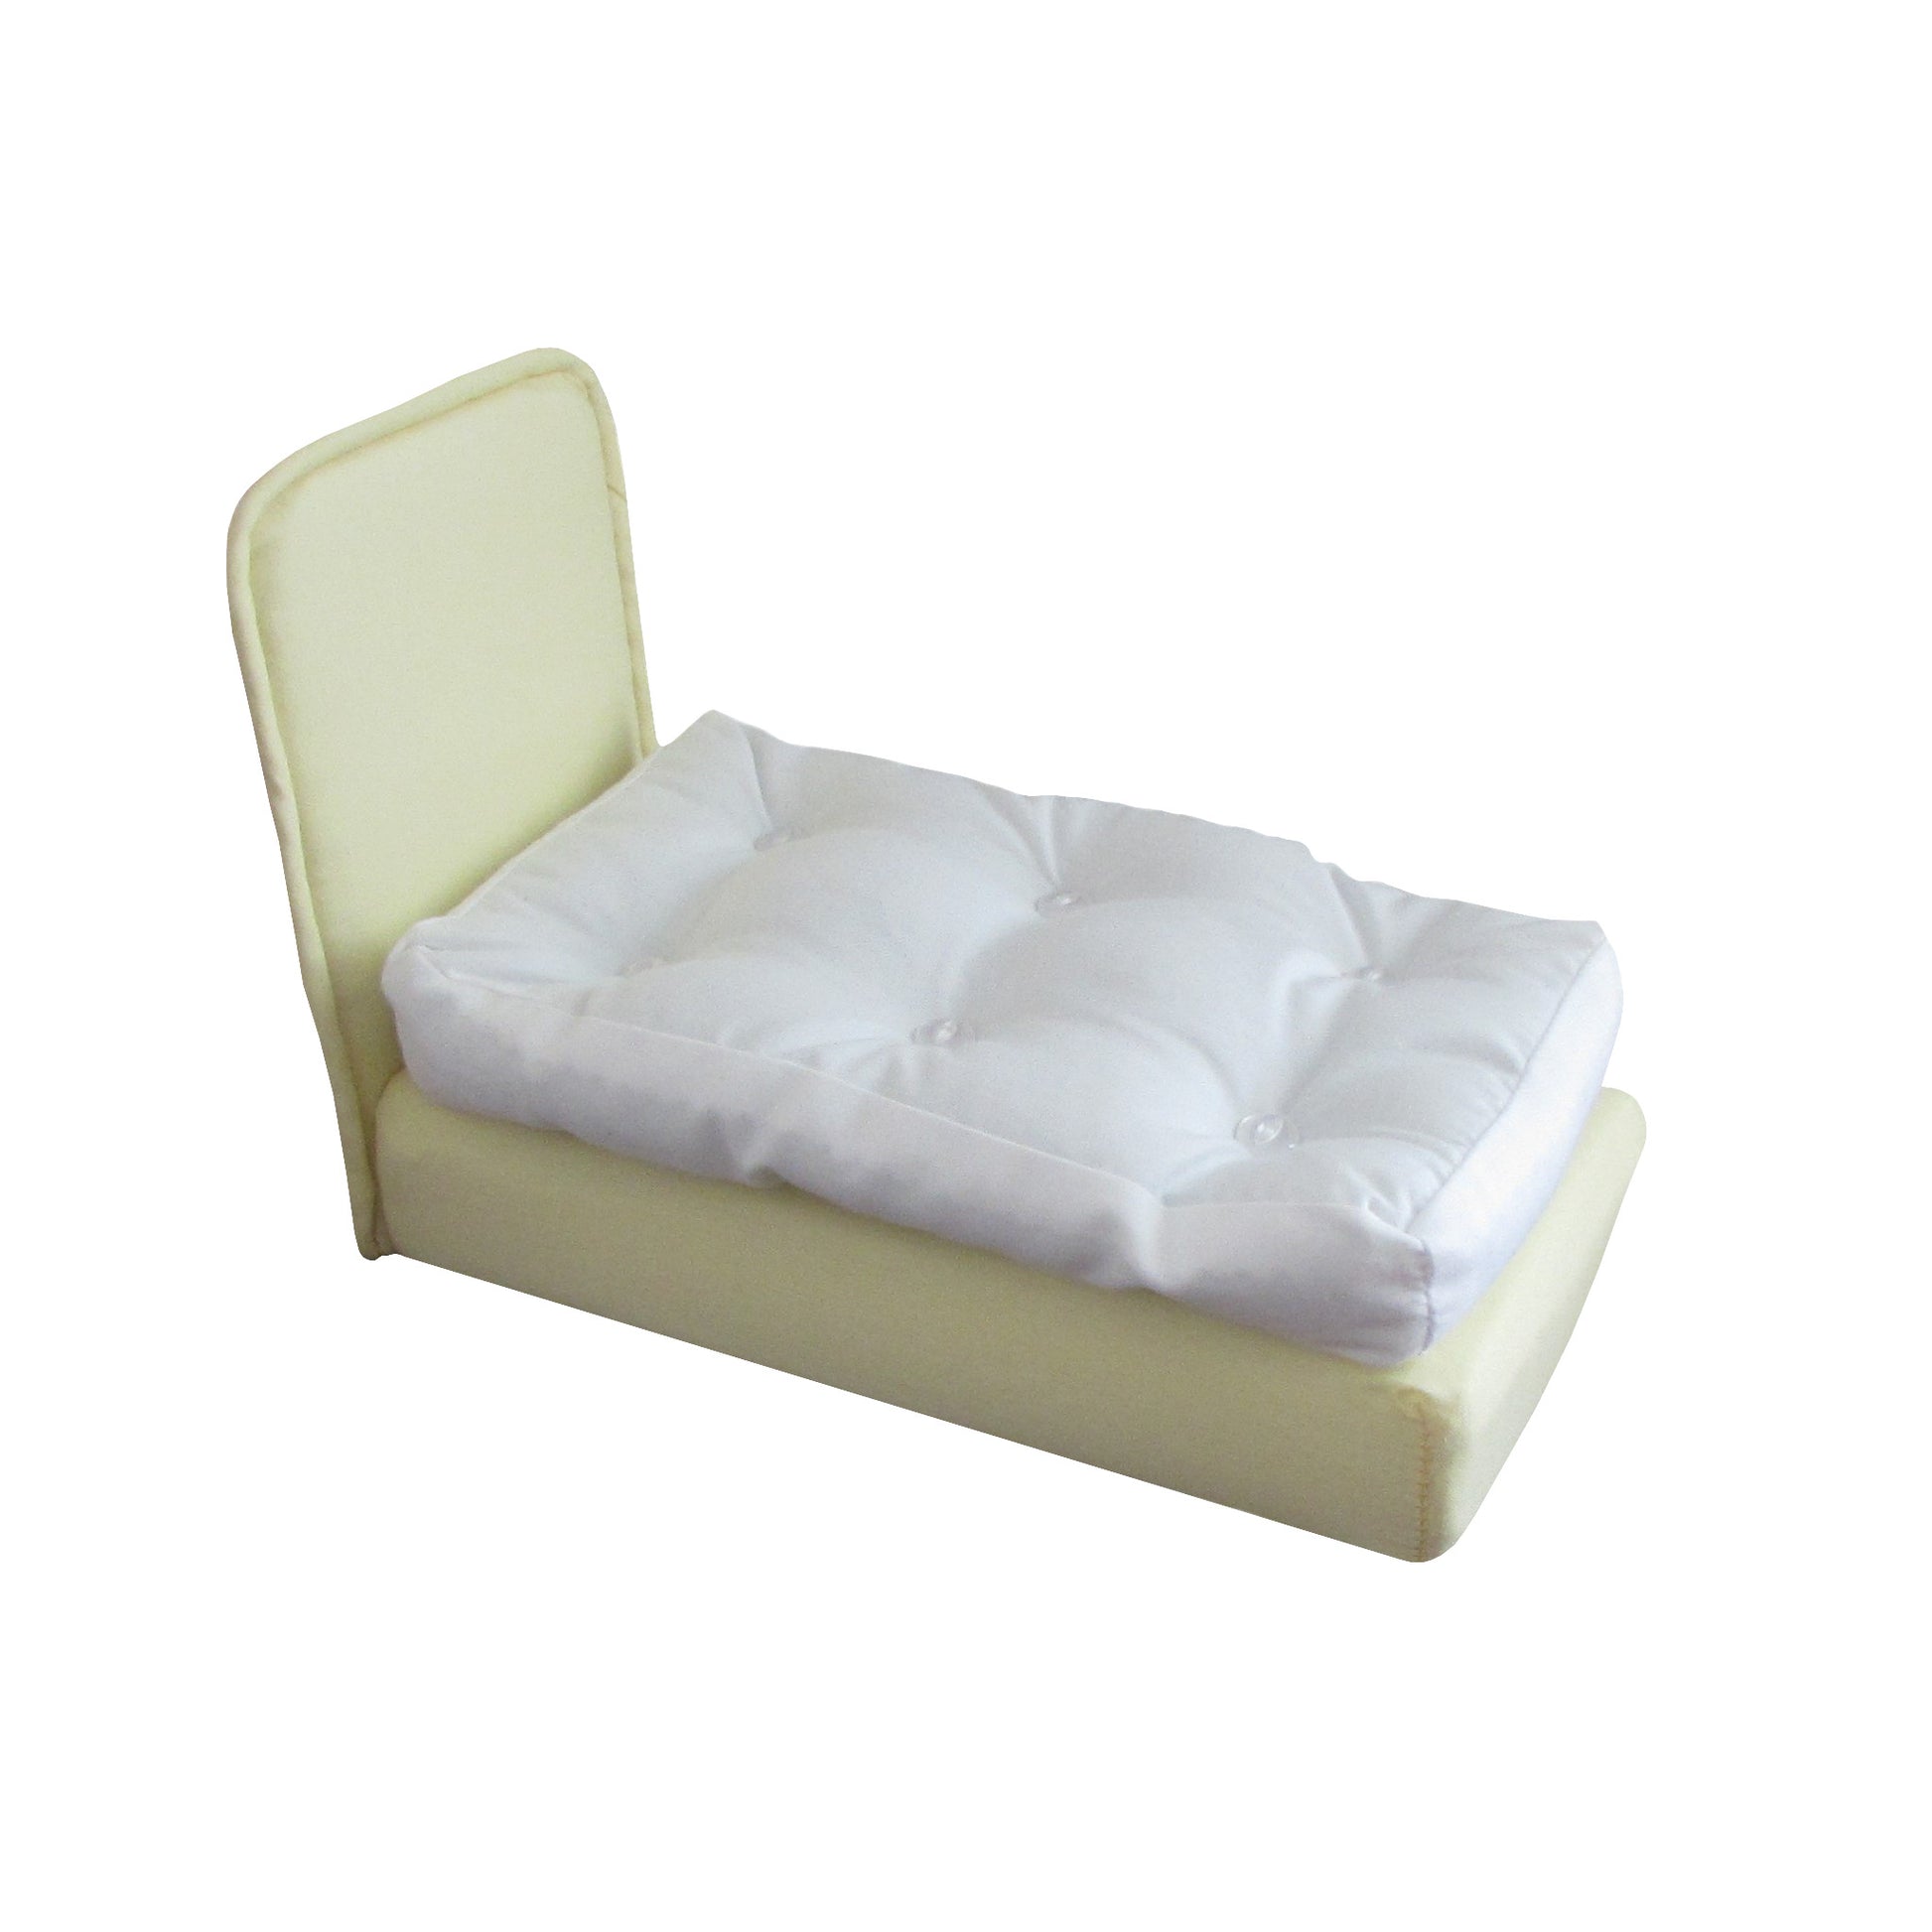 Upholstered Light Yellow Doll Bed for 6.5-inch dolls